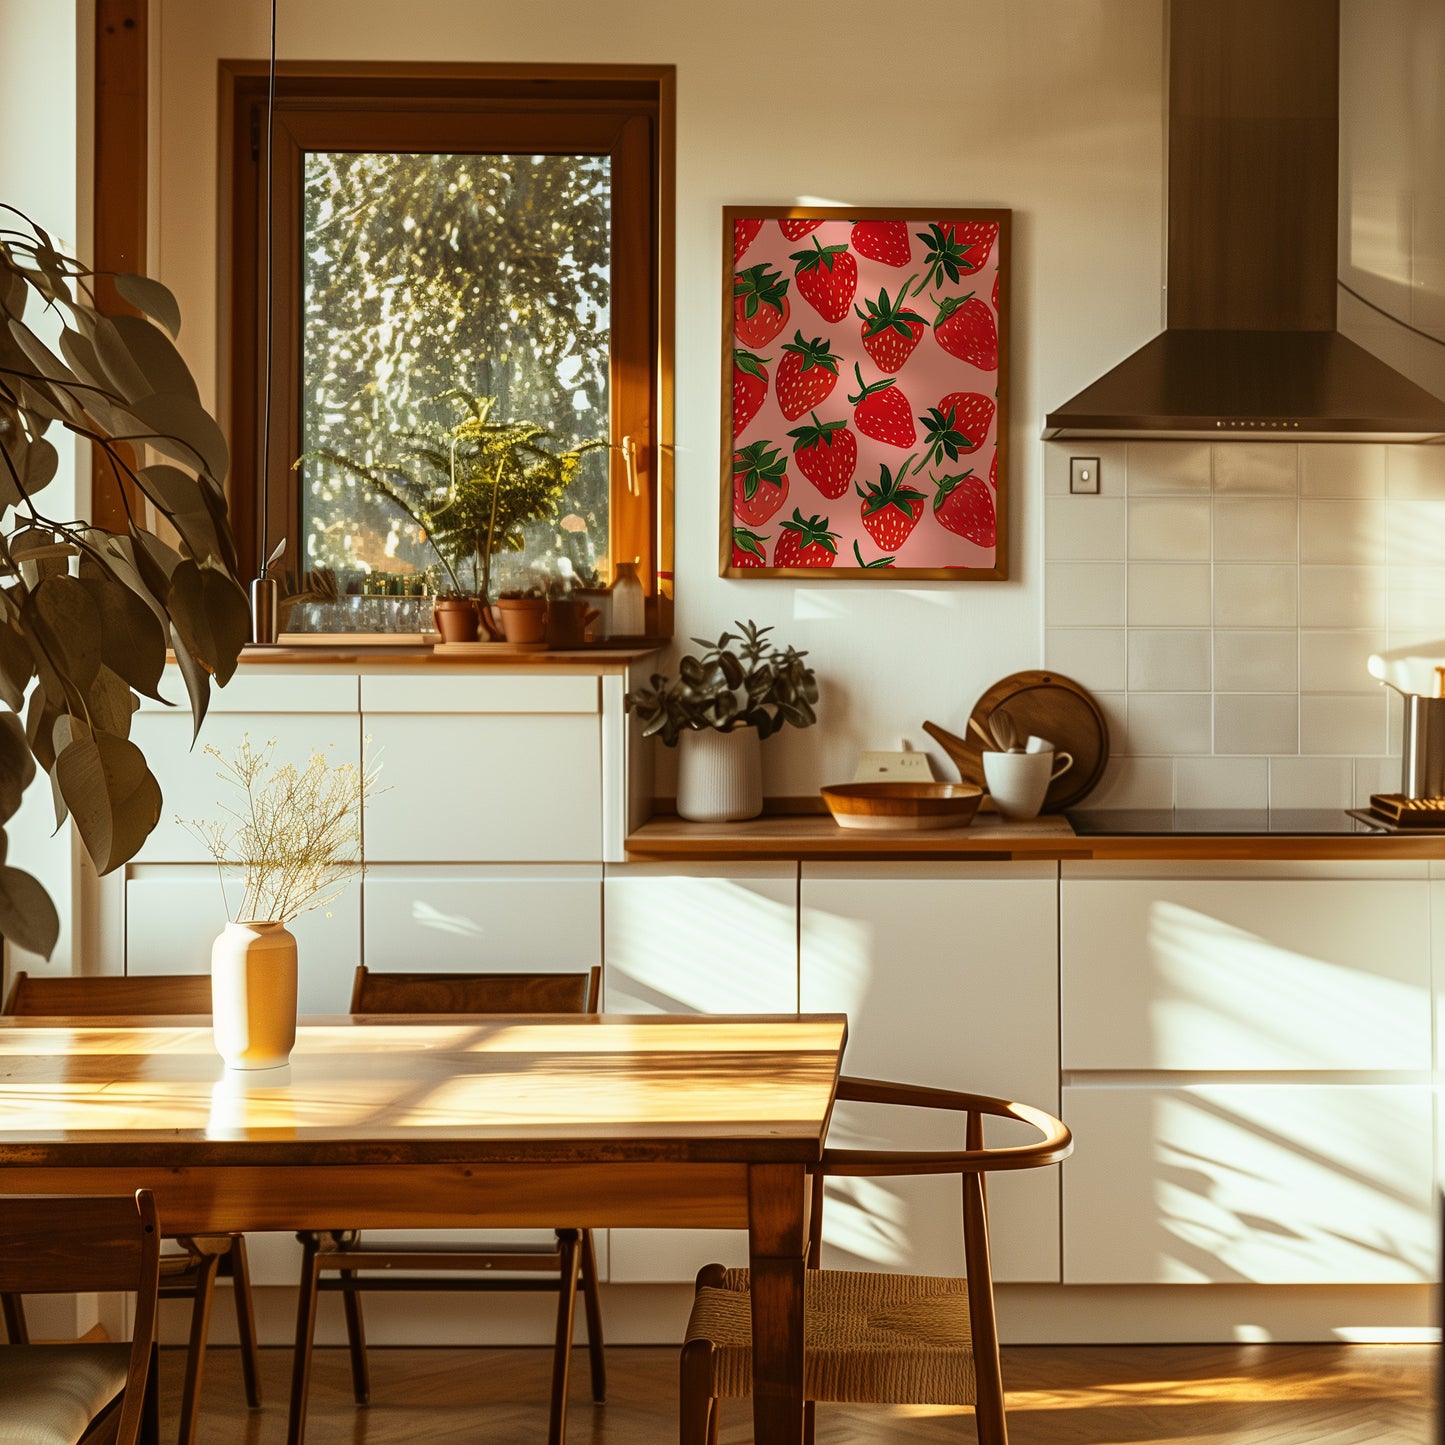 Sunny modern kitchen interior with a wooden table and a plant, with a strawberry art piece on the wall.